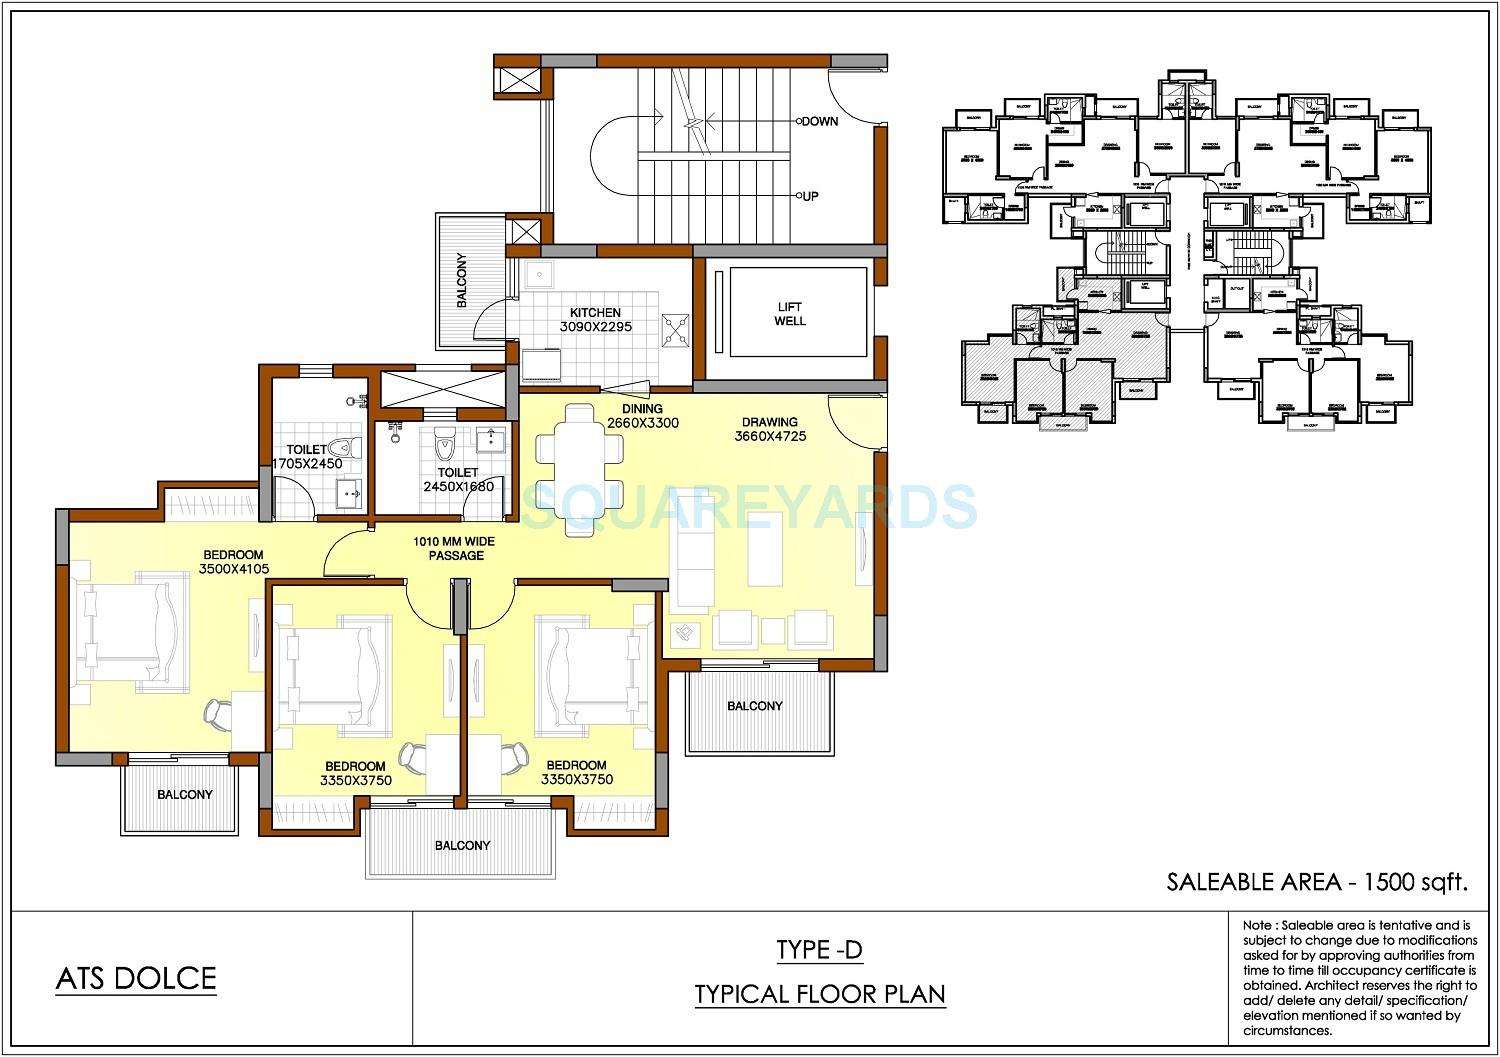 3 BHK 1500 Sq. Ft. Apartment in ATS Dolce